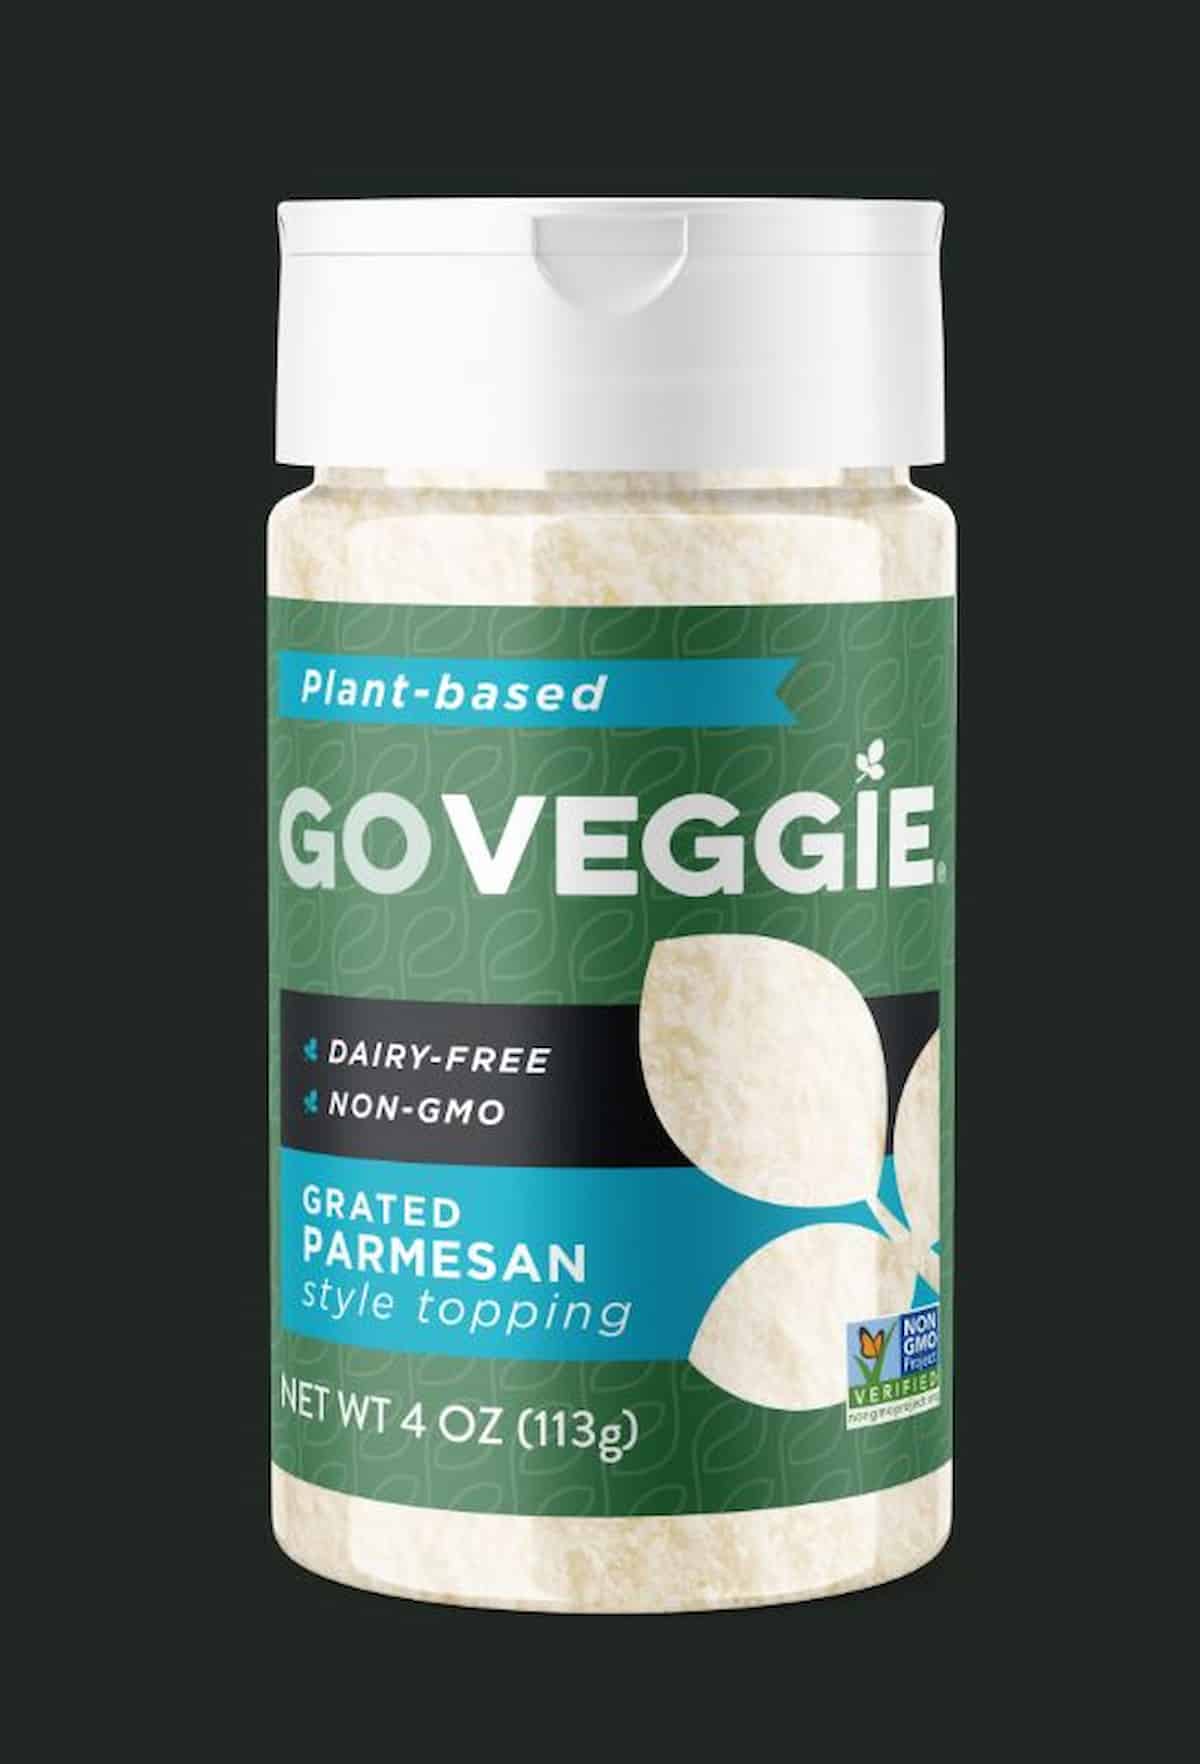 A container of Go Veggie brand plant-based grated parmesan.